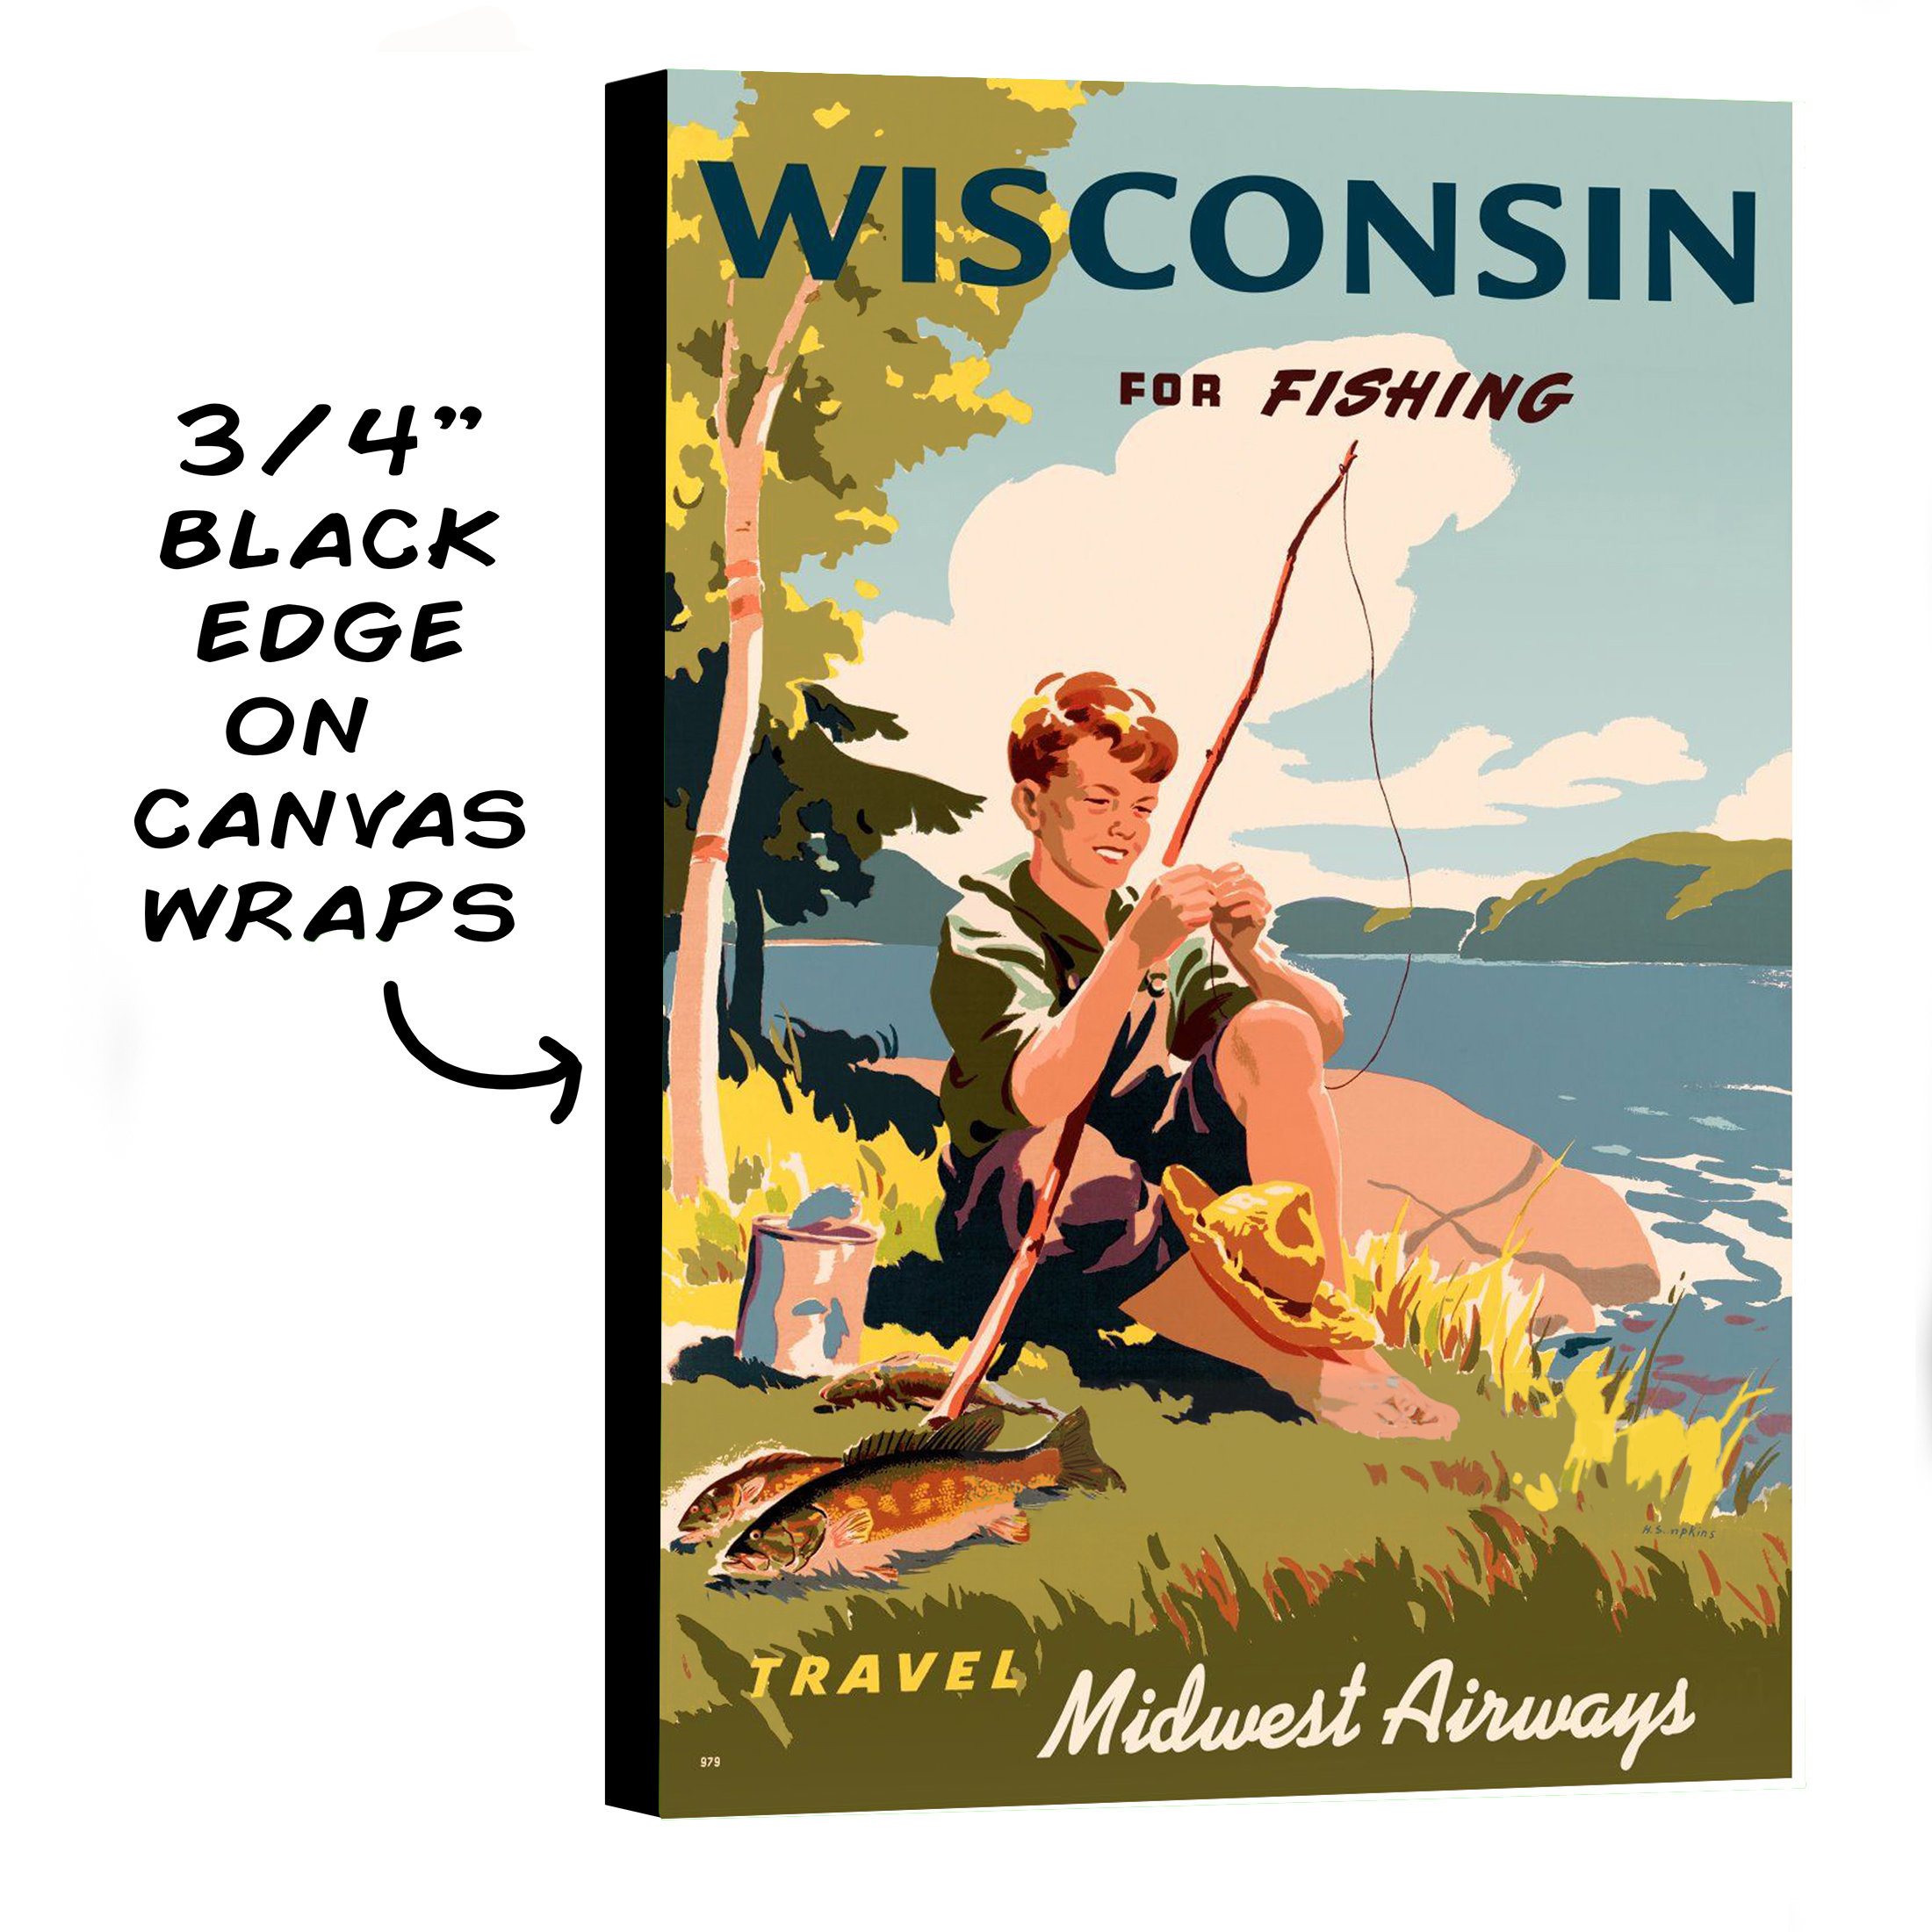 Wisconsin for Fishing Vintage Airline Travel Poster 